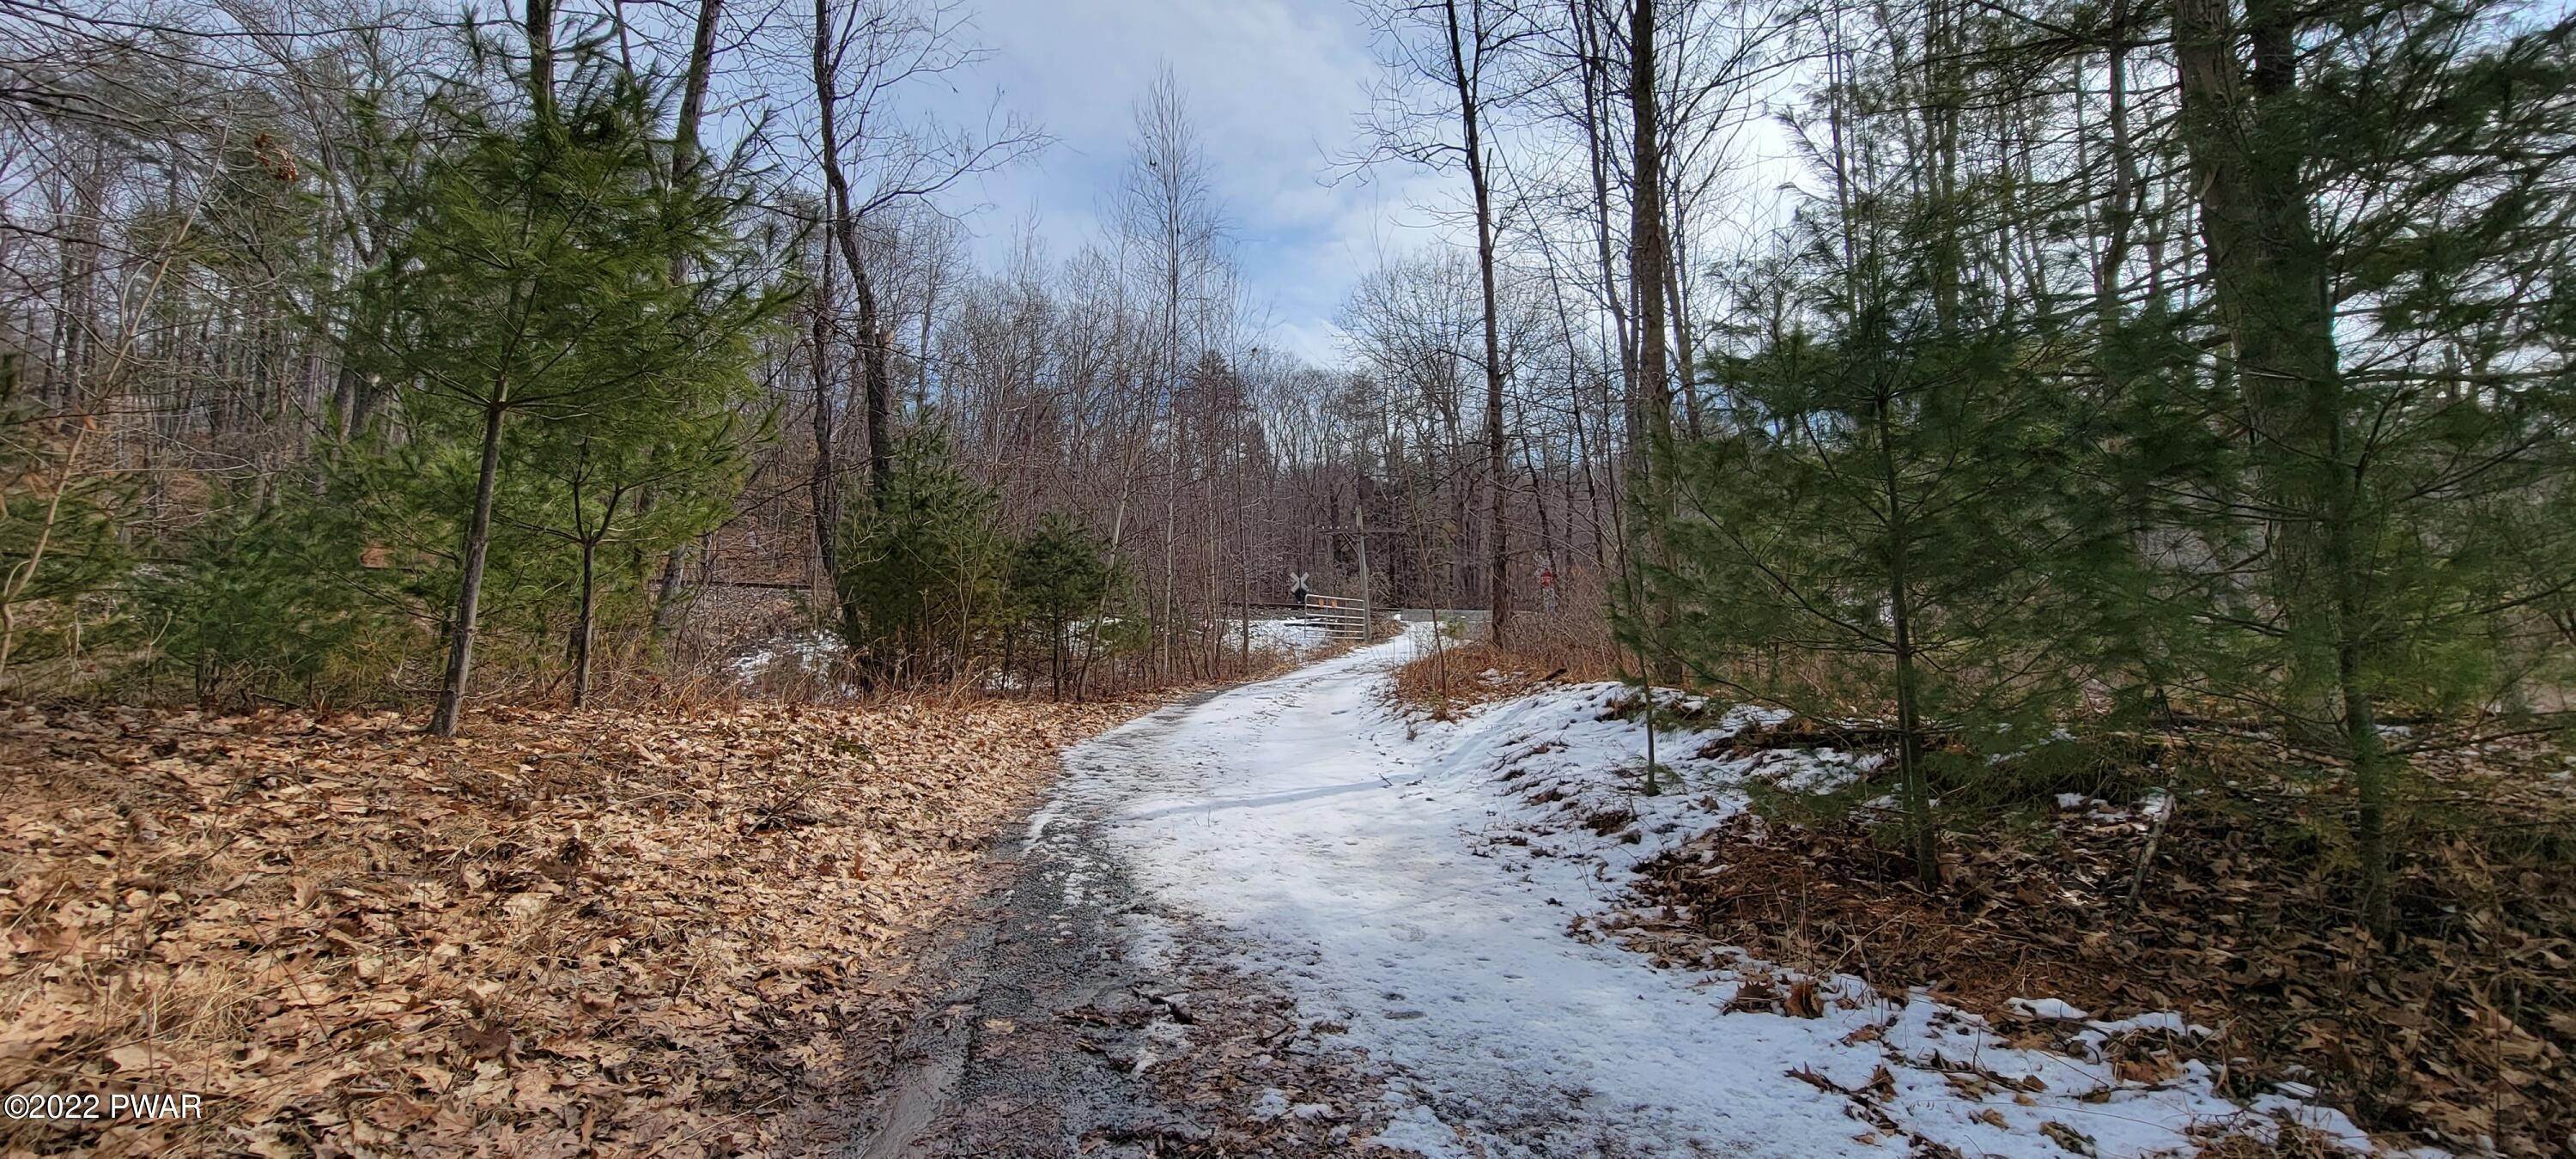 33. Land for Sale at Lot 5.2 Humphrey Rd Narrowsburg, New York 12764 United States